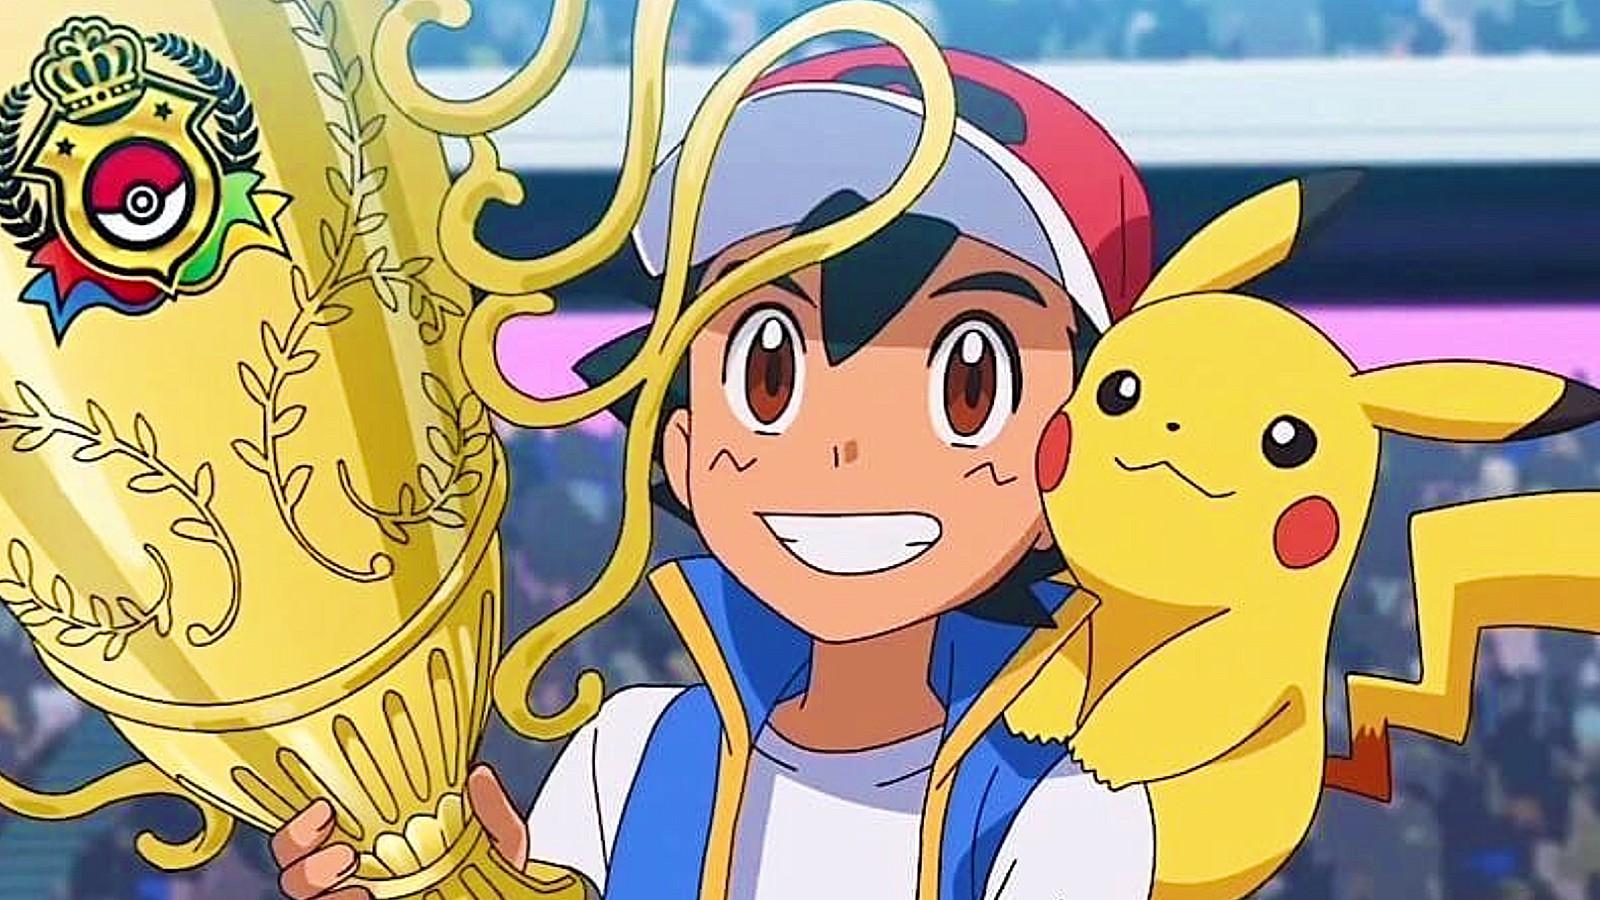 Ash Ketchum and Pikachu in Pokémon Ultimate Journeys